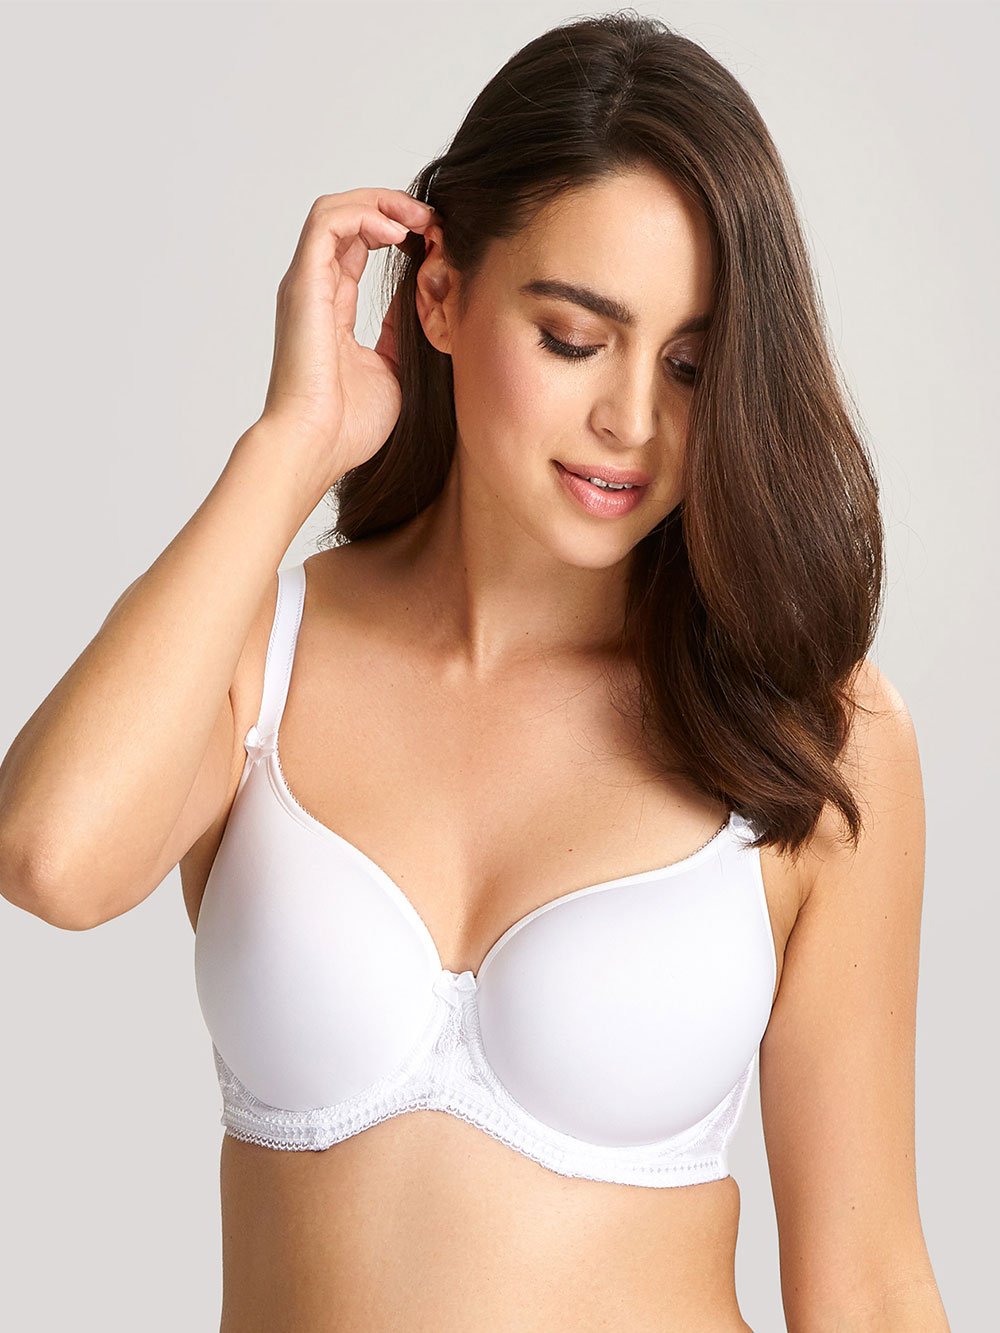 32E Bras: Bras for 32E Boobs and Breast Size Tagged Strapless